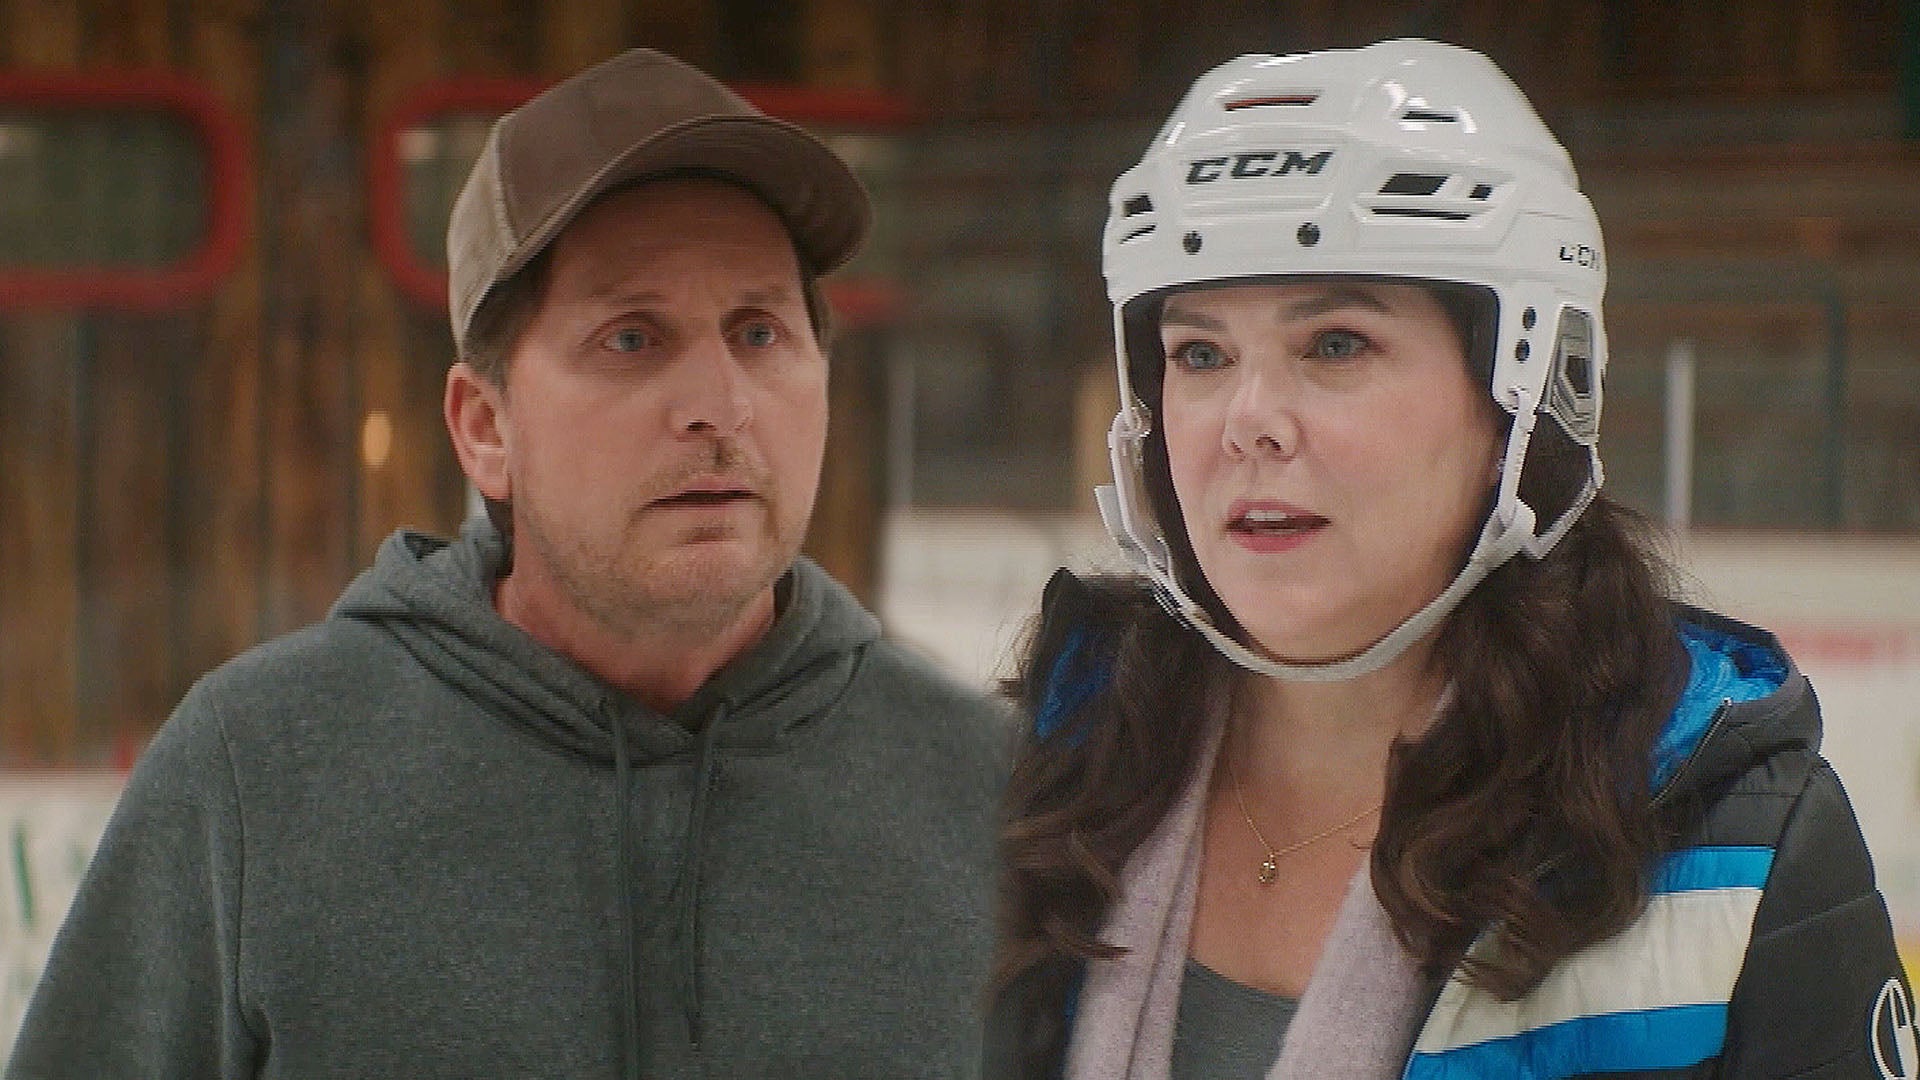 The Mighty Ducks: Game Changers State of Play (TV Episode 2021